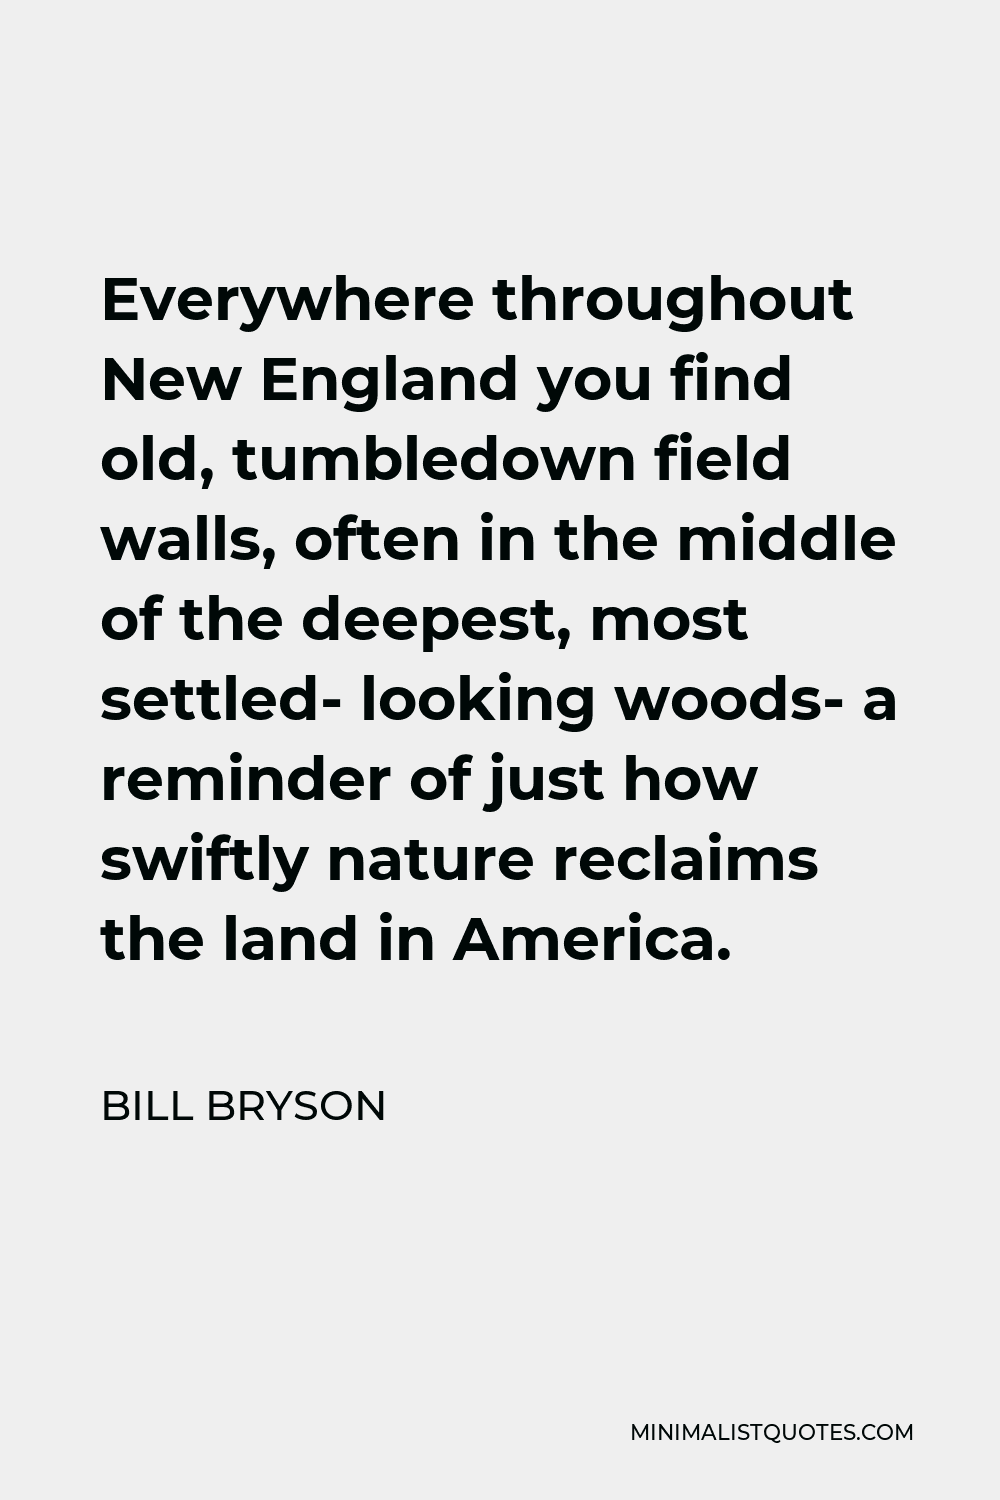 Bill Bryson Quote - Everywhere throughout New England you find old, tumbledown field walls, often in the middle of the deepest, most settled- looking woods- a reminder of just how swiftly nature reclaims the land in America.